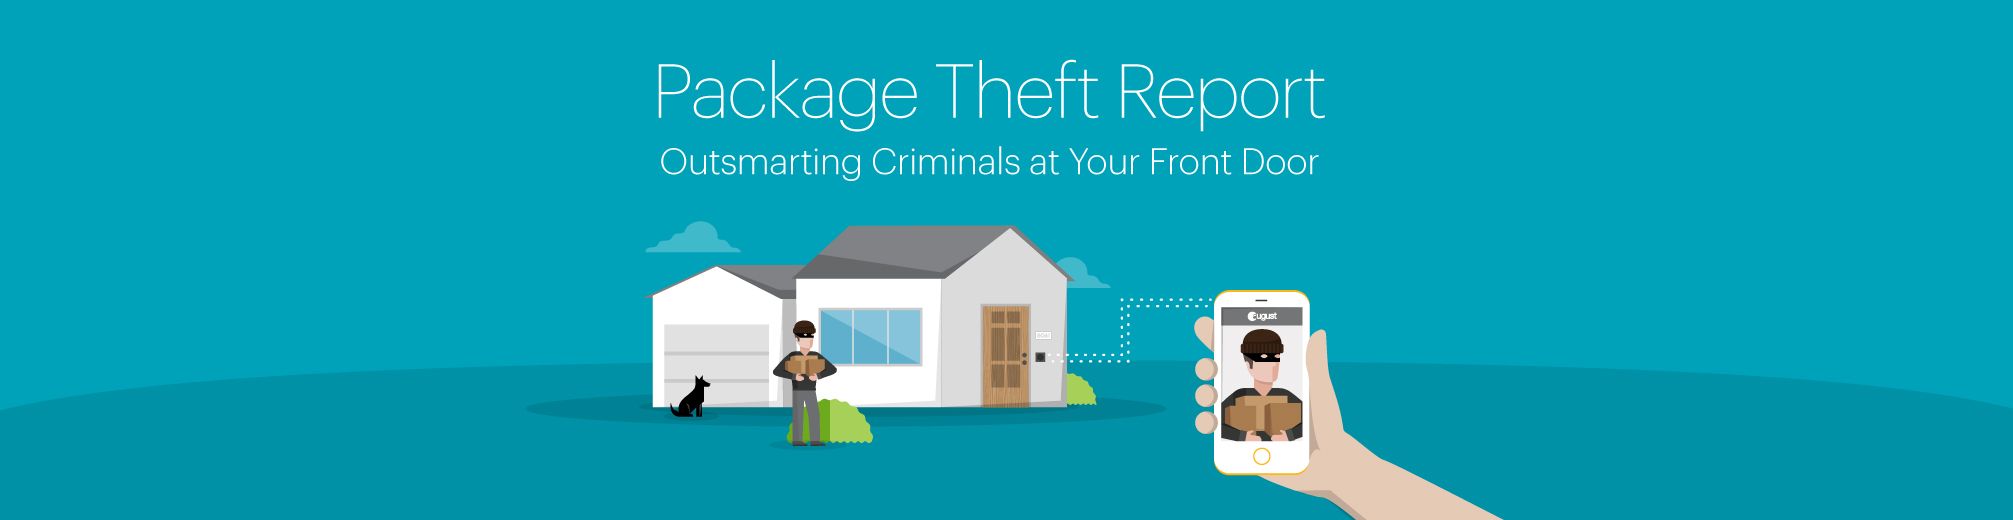 Research: Package Theft Report